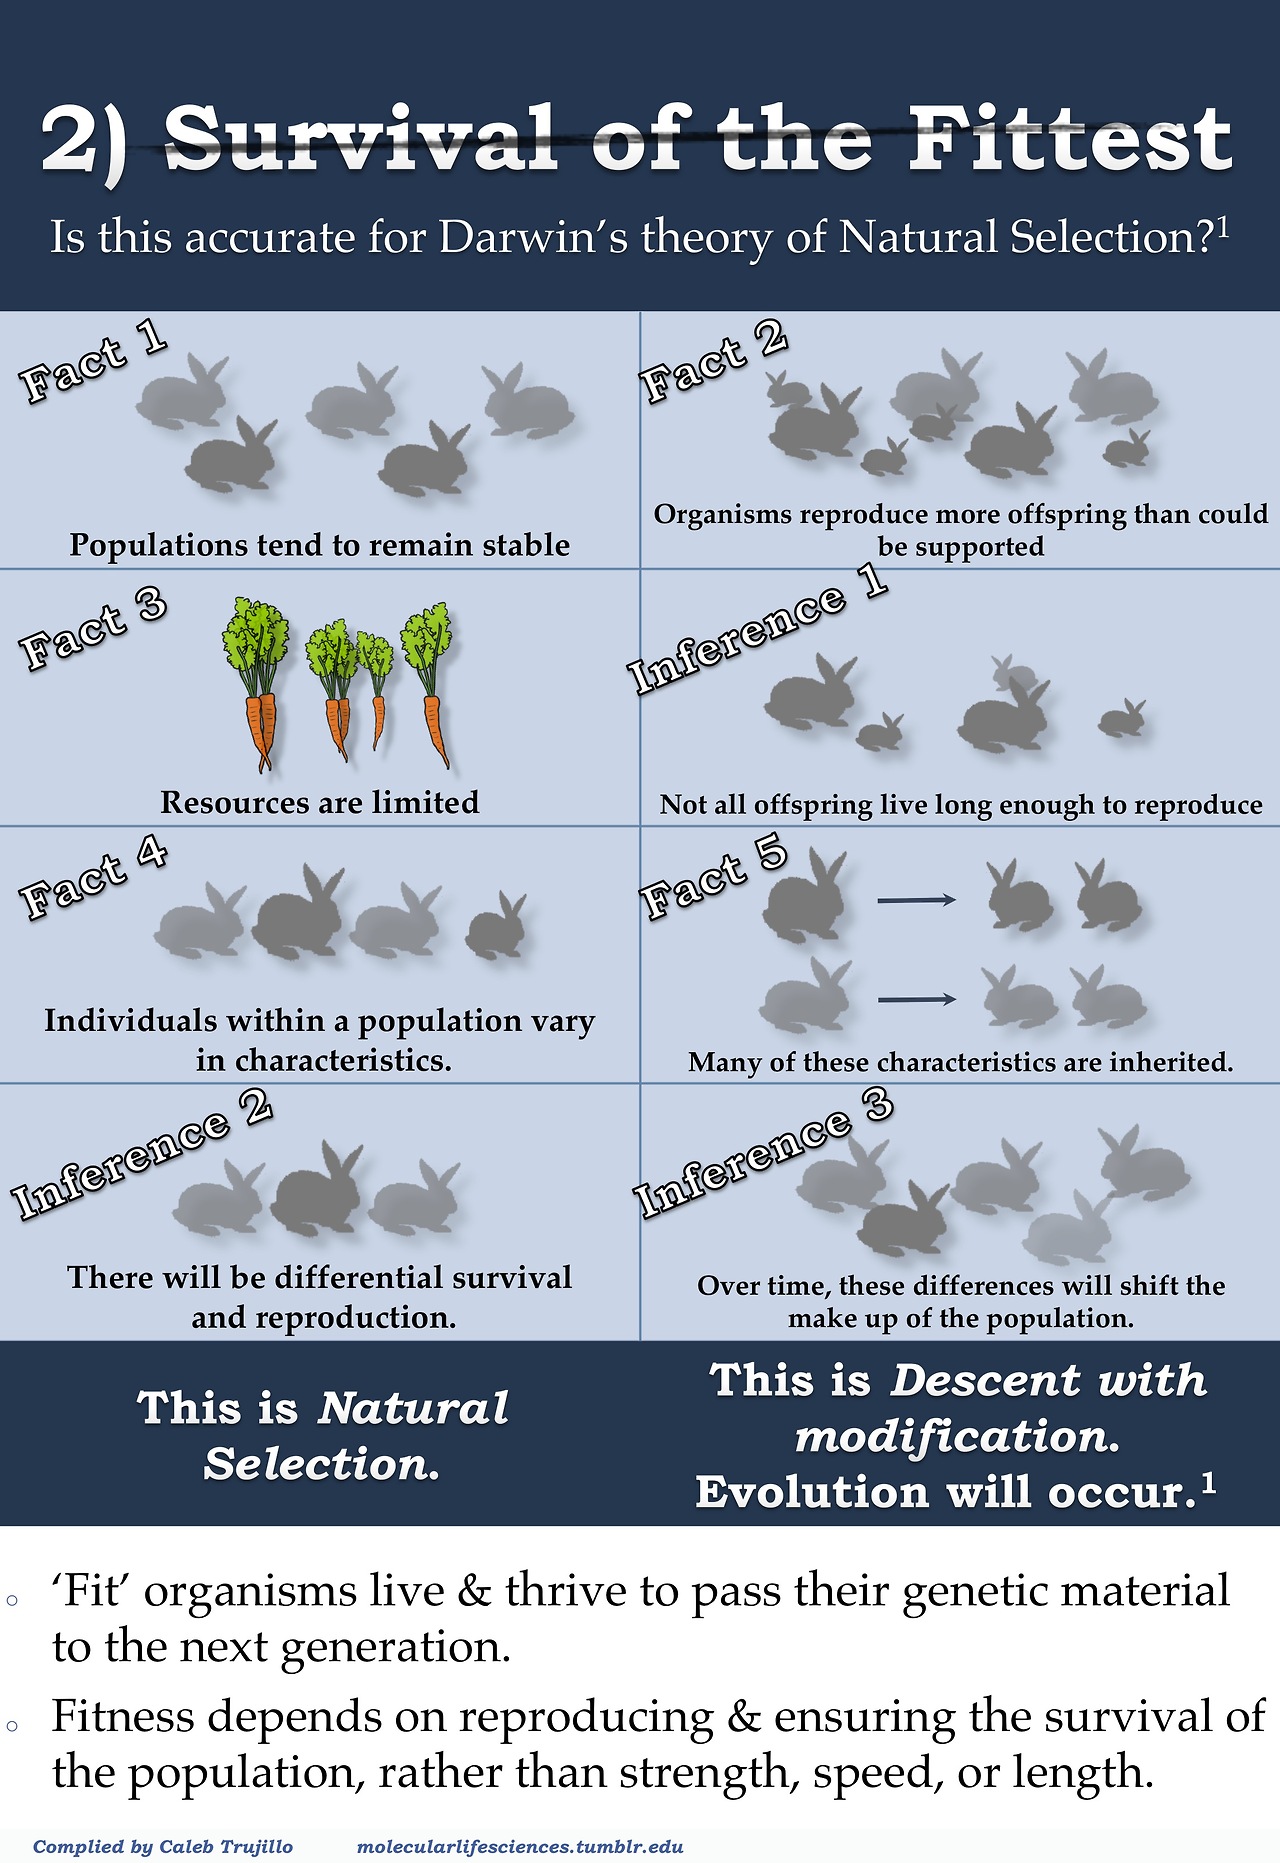 Top Five Misconceptions About Evolution, According To Science